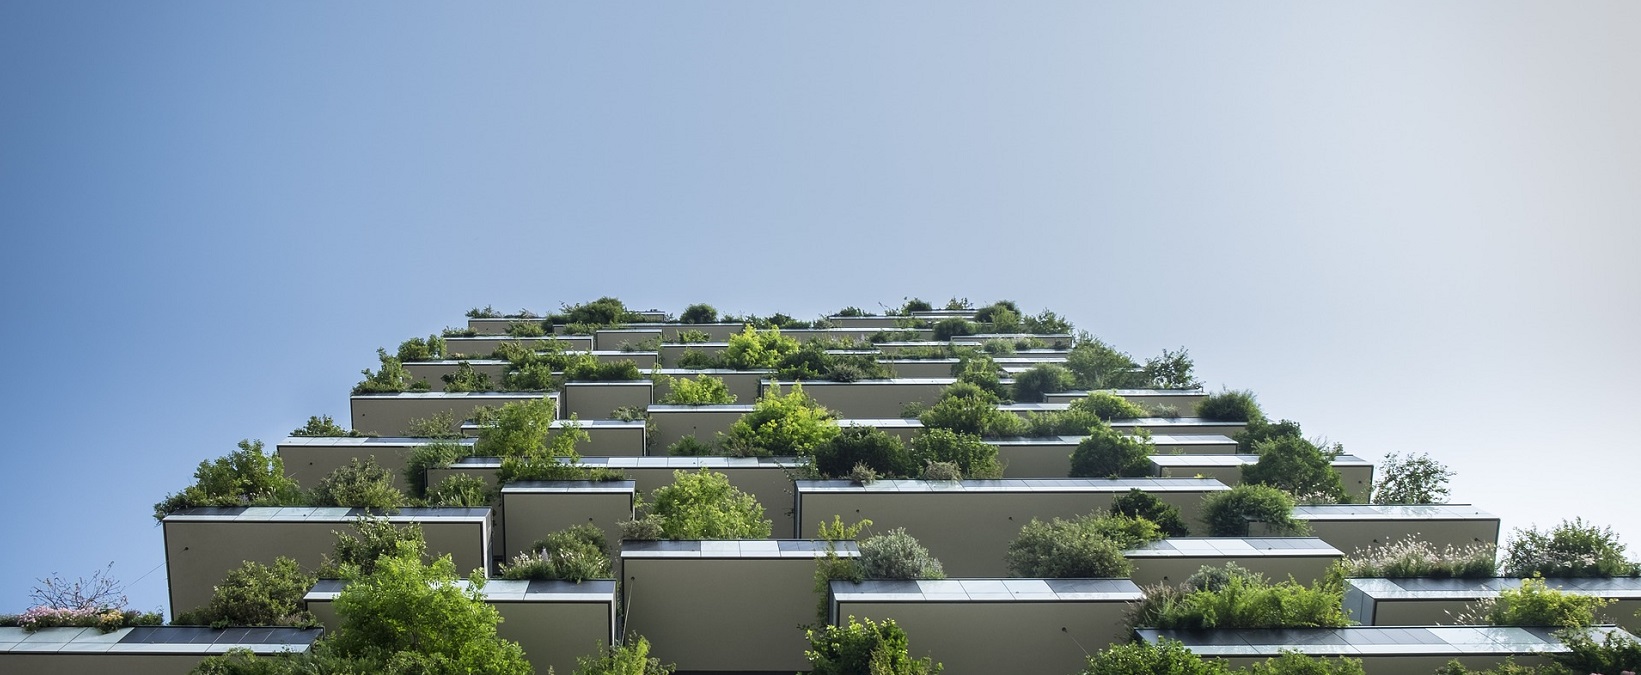 Now May Be Just the Moment to Re-Make the Green Building Agenda